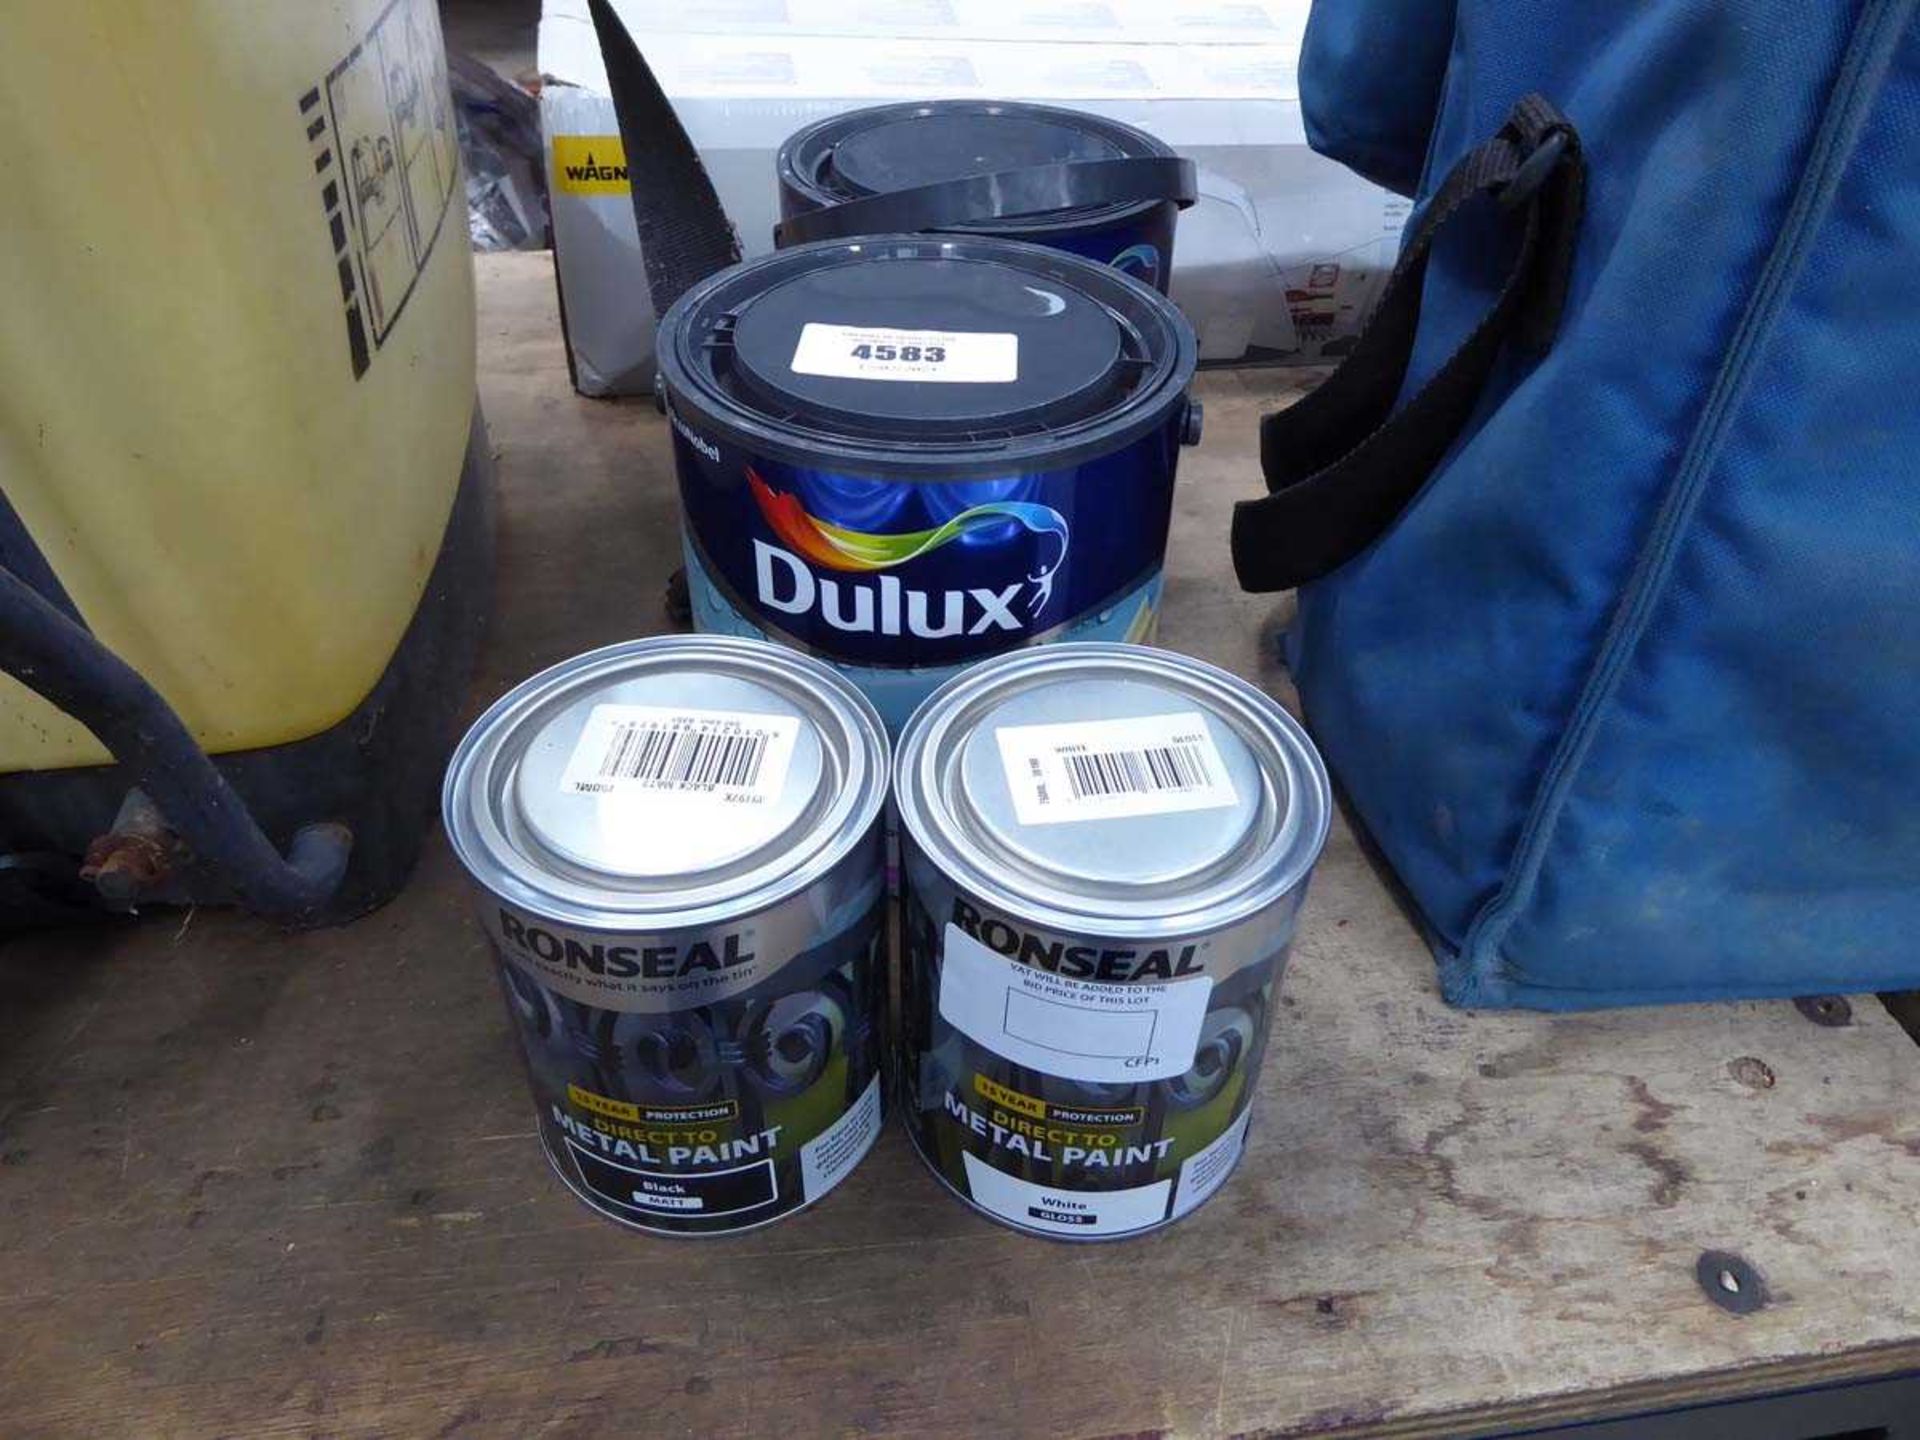 +VAT 2 tins of metal paint and 2 tins of emulsion